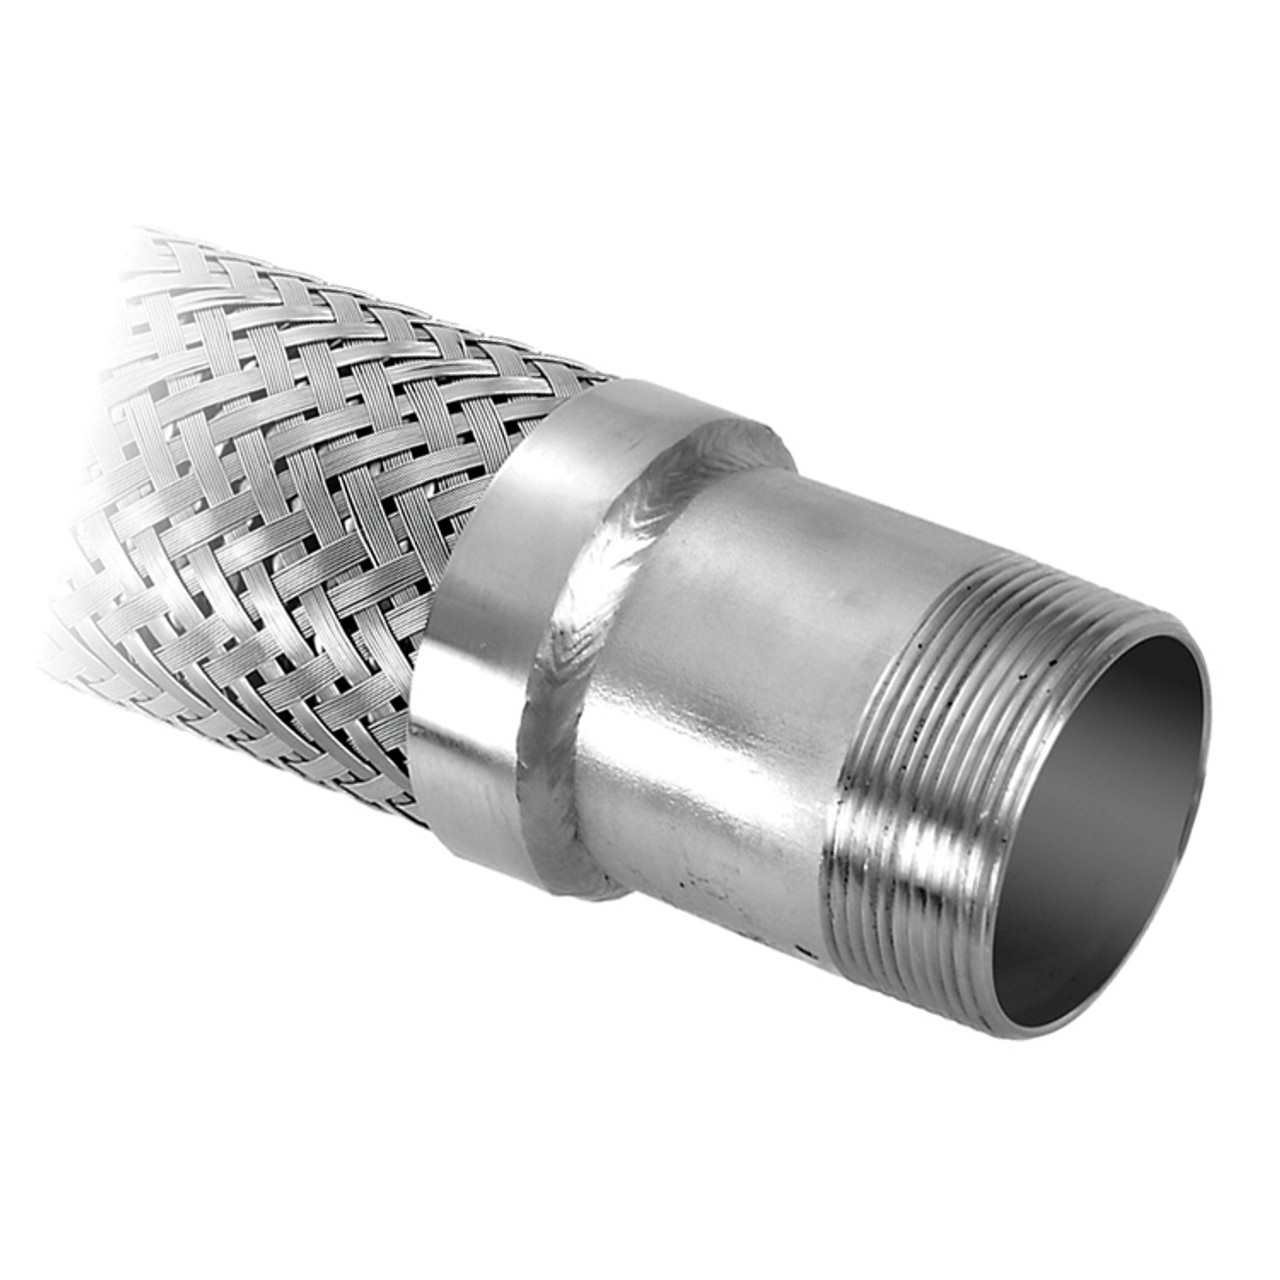 1/2 x 1/2" x 12" Stainless Steel Hose Assembly CSA w/ Male Plain NPT Ends   G521CSA-050MM-12